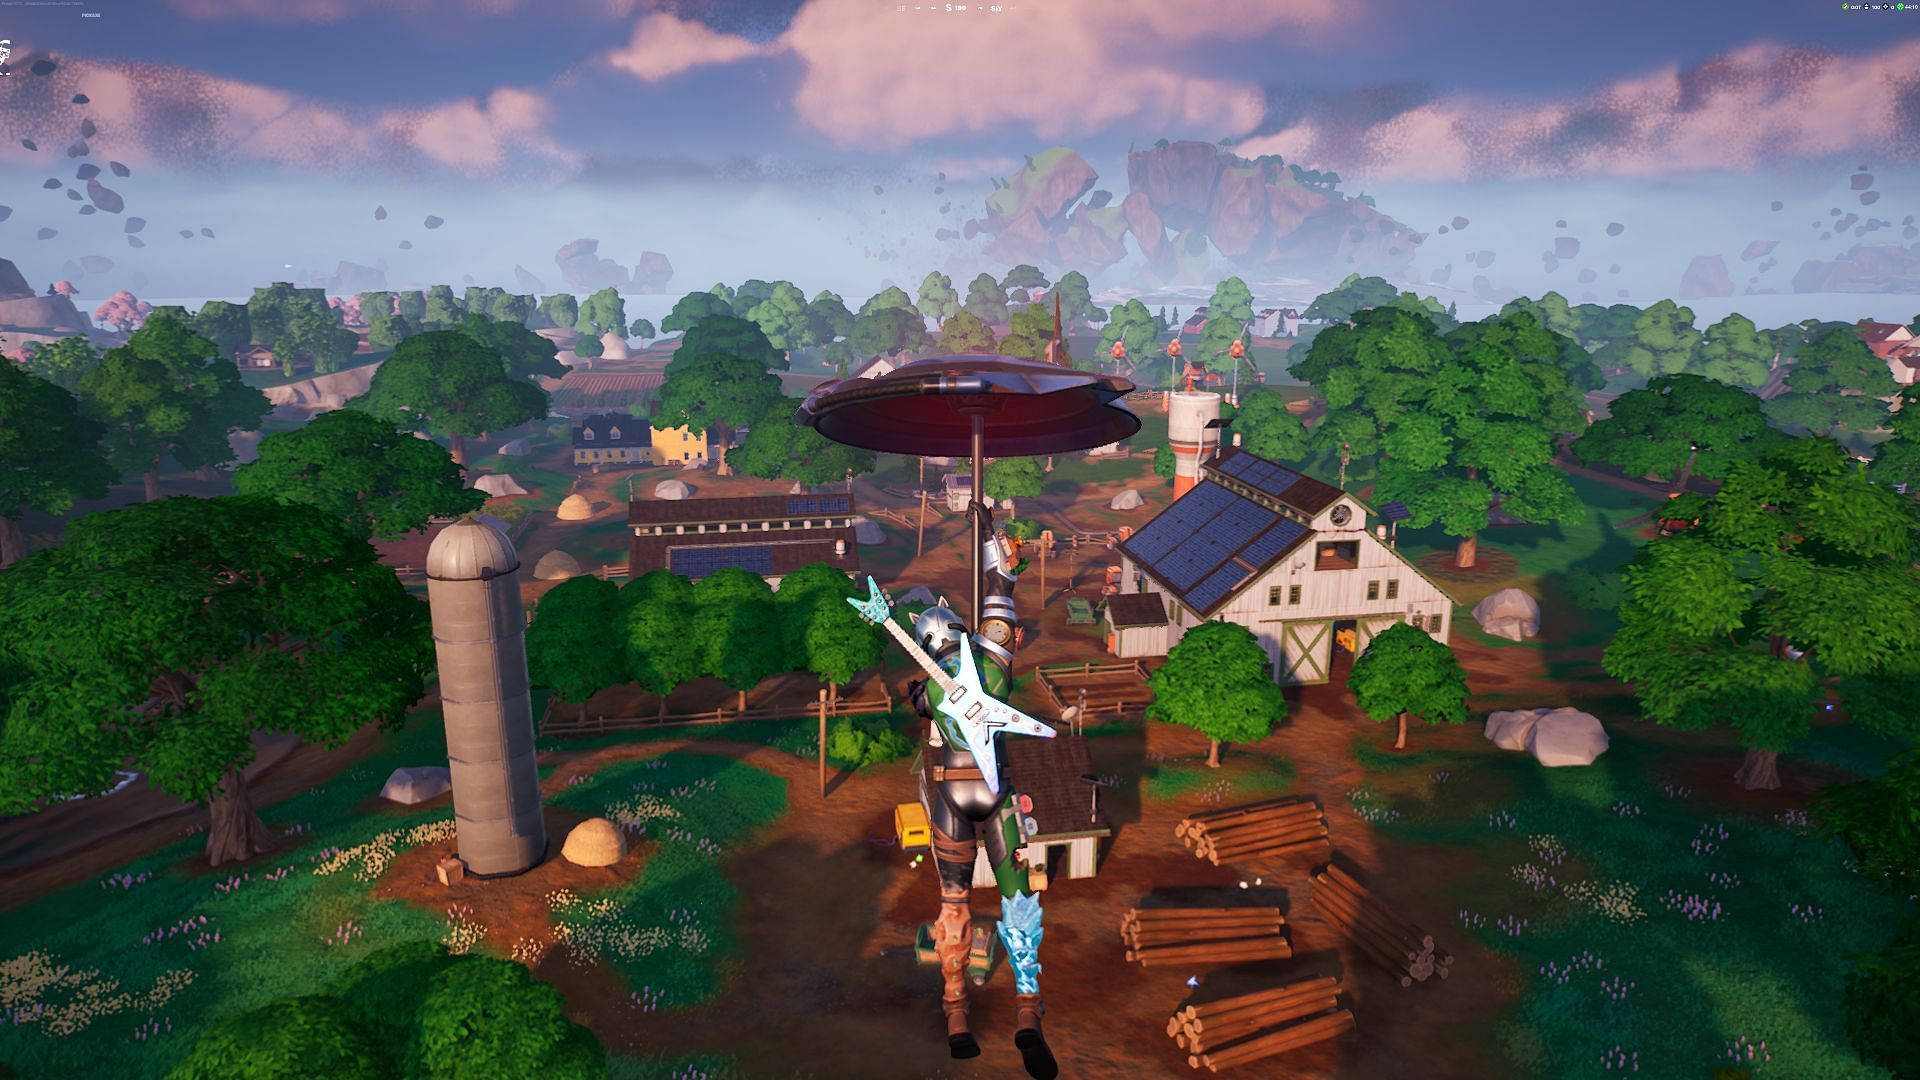 Frenzy Fields is very open and lacks cover (Image via Epic Games/Fortnite)